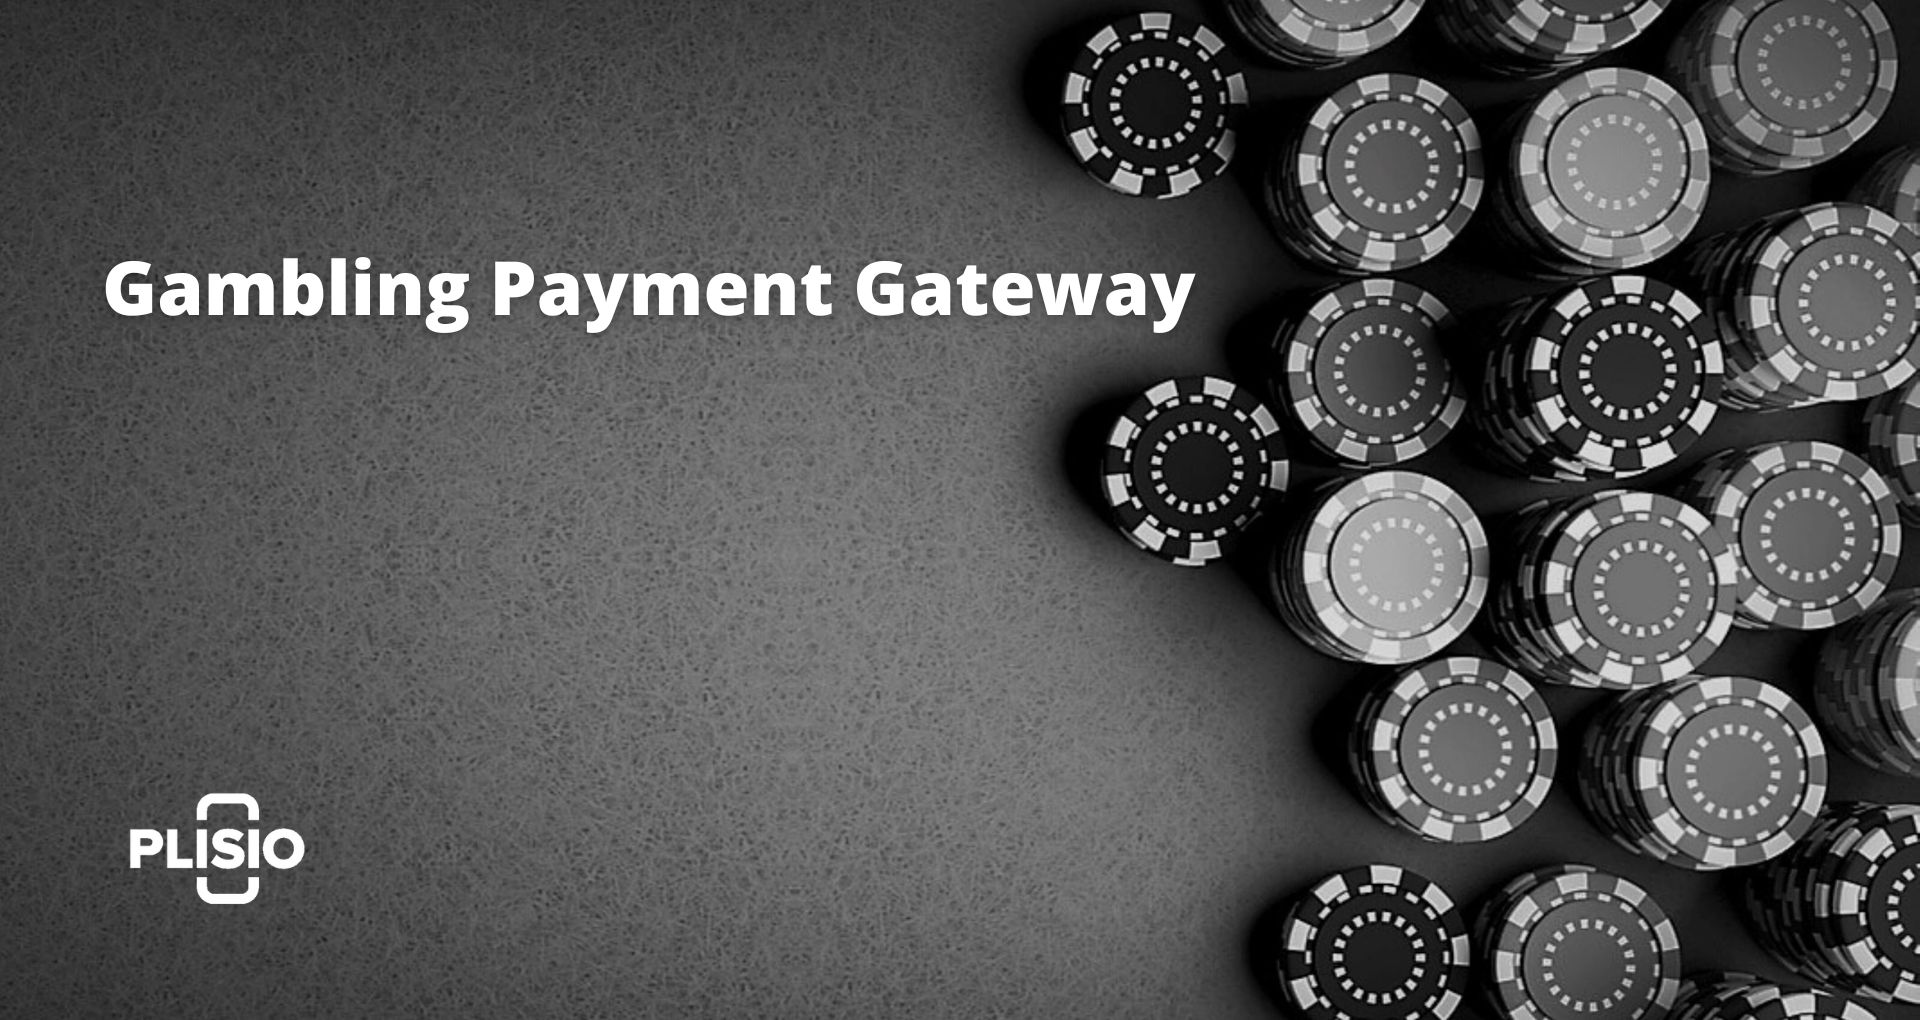 Gambling Payment Gateway: The Rise of Cryptocurrency in the Casino World